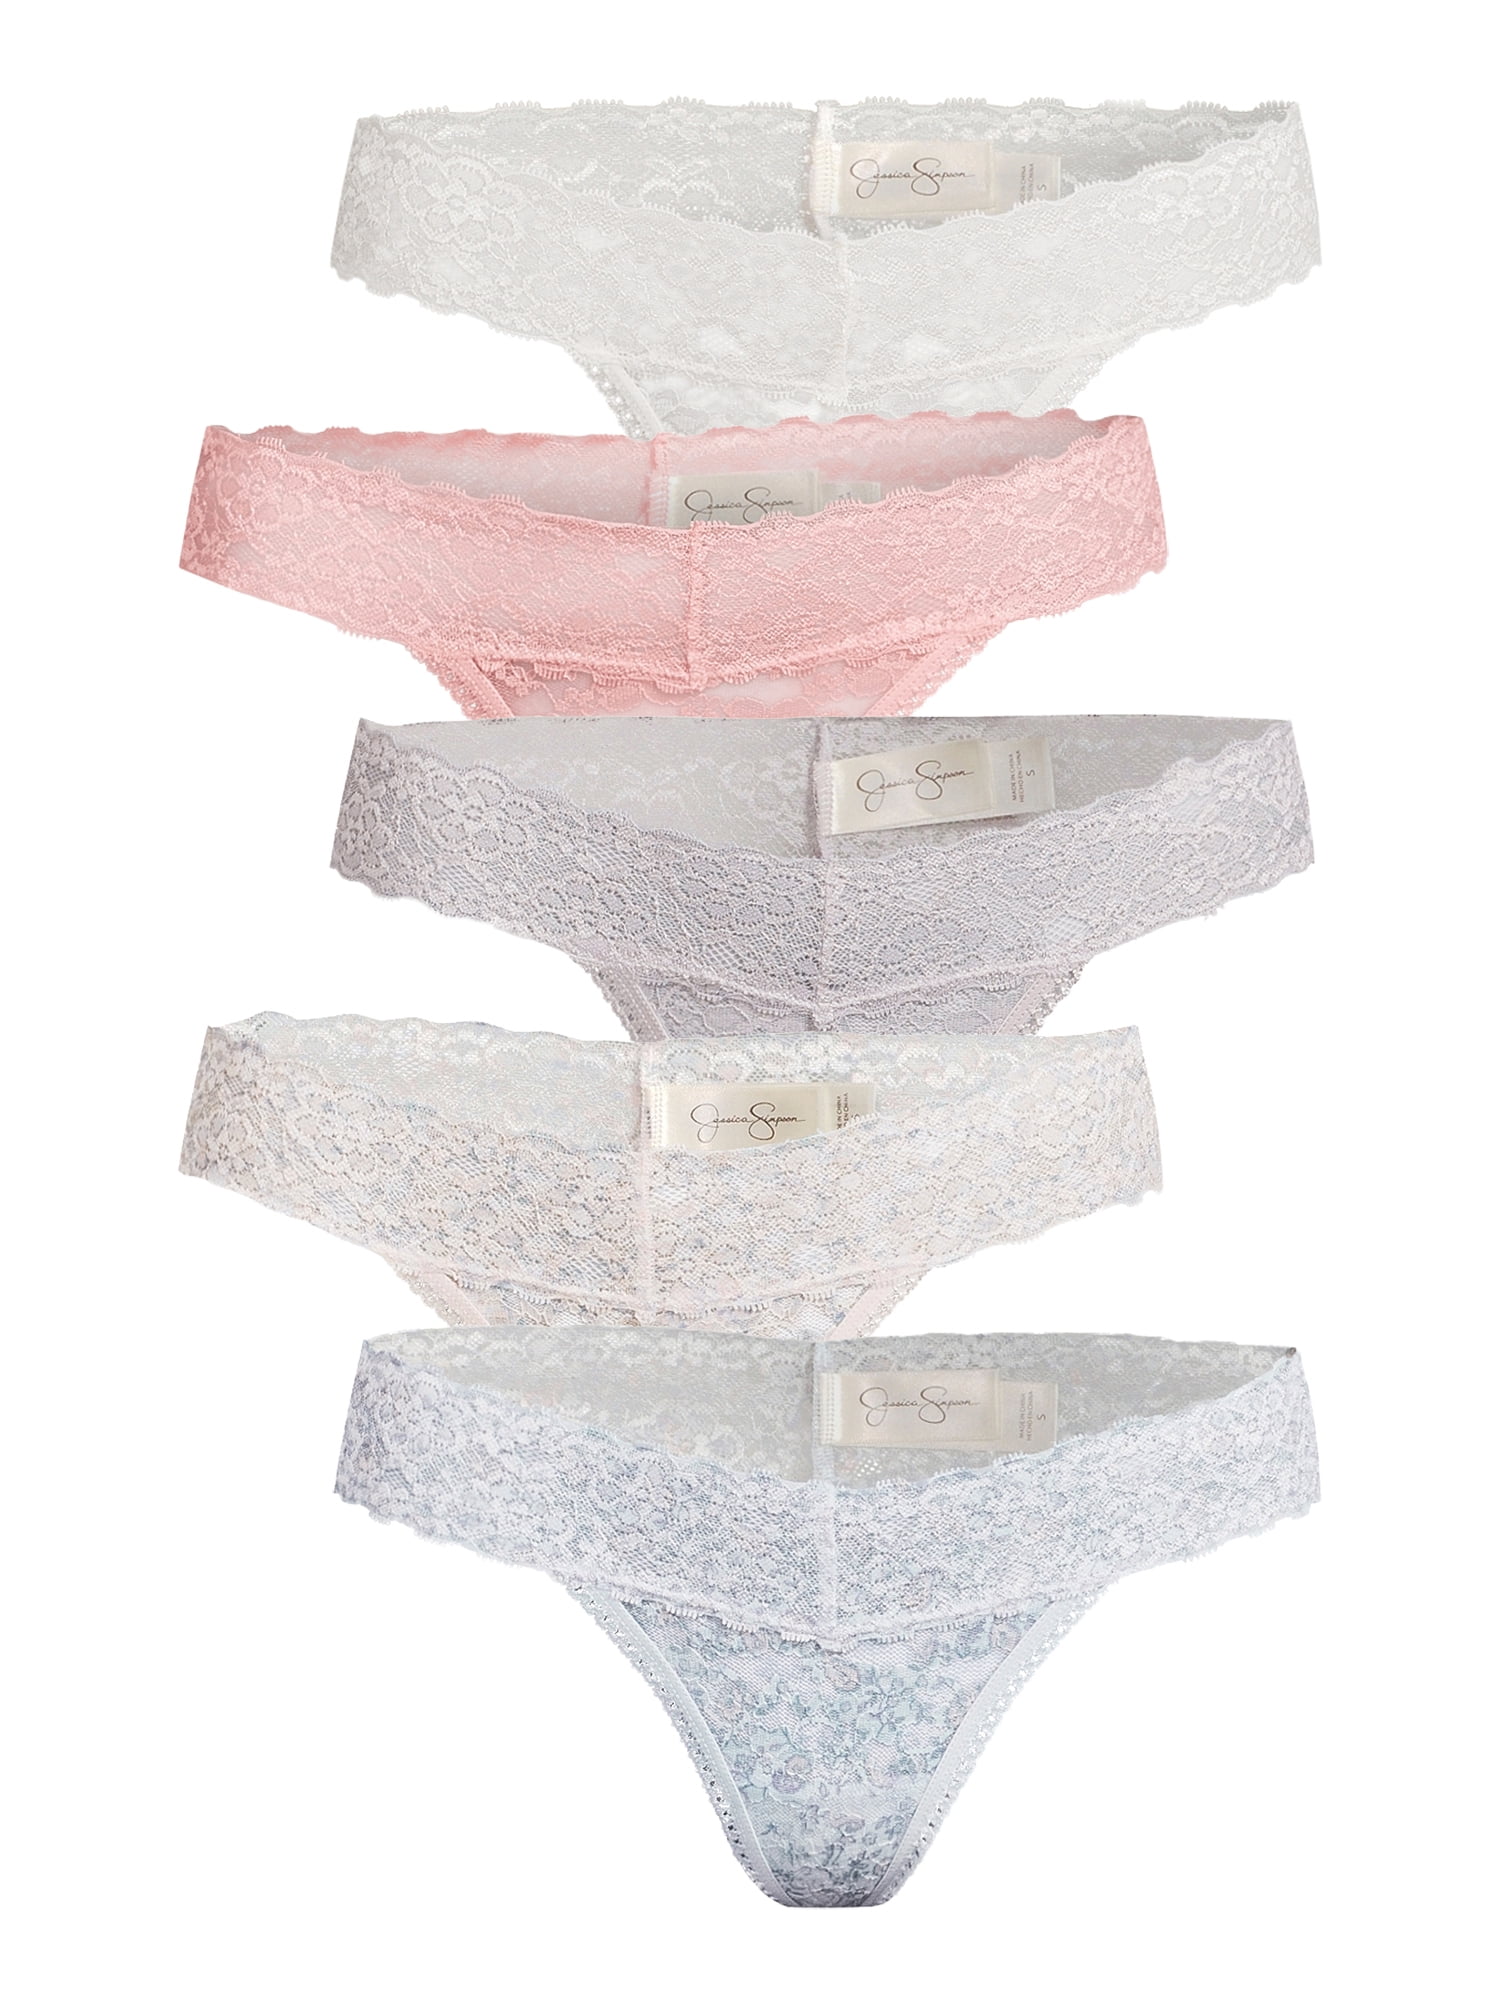 Jessica Simpson Women's Lace Thong Panties, 5-Pack 